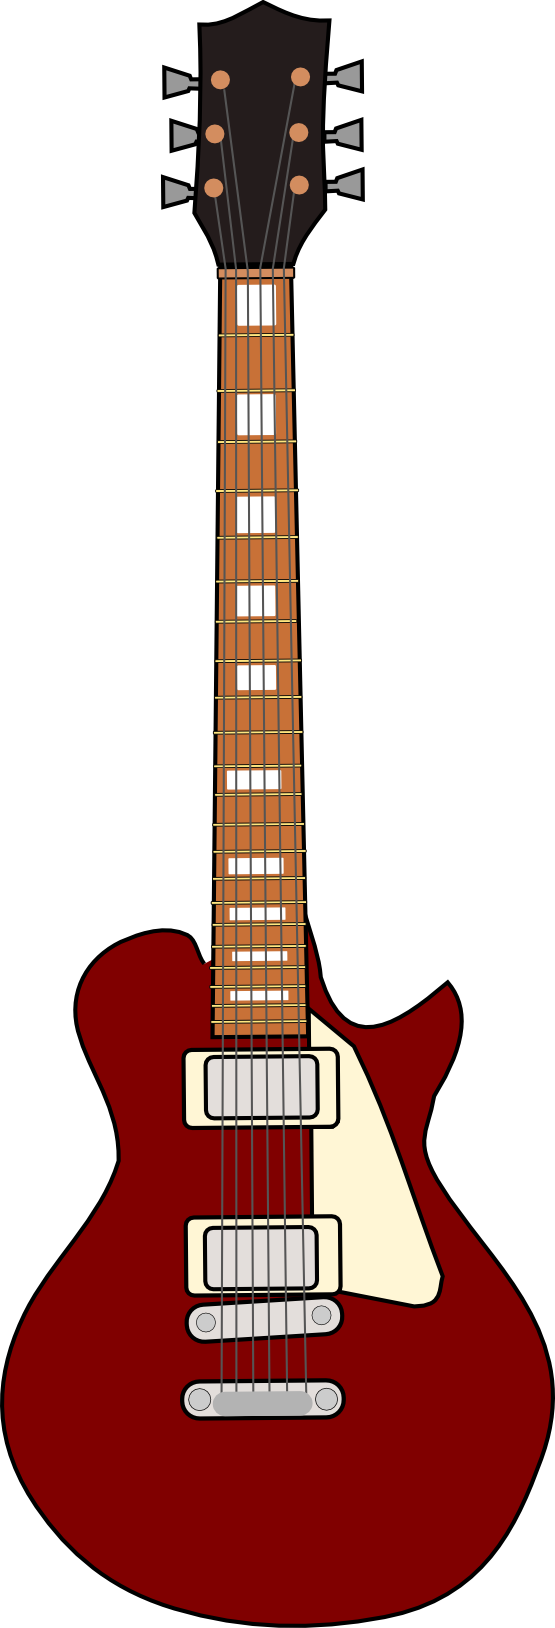 Free Guitar Art Image, Download Free Clip Art, Free Clip Art on Clipart Library